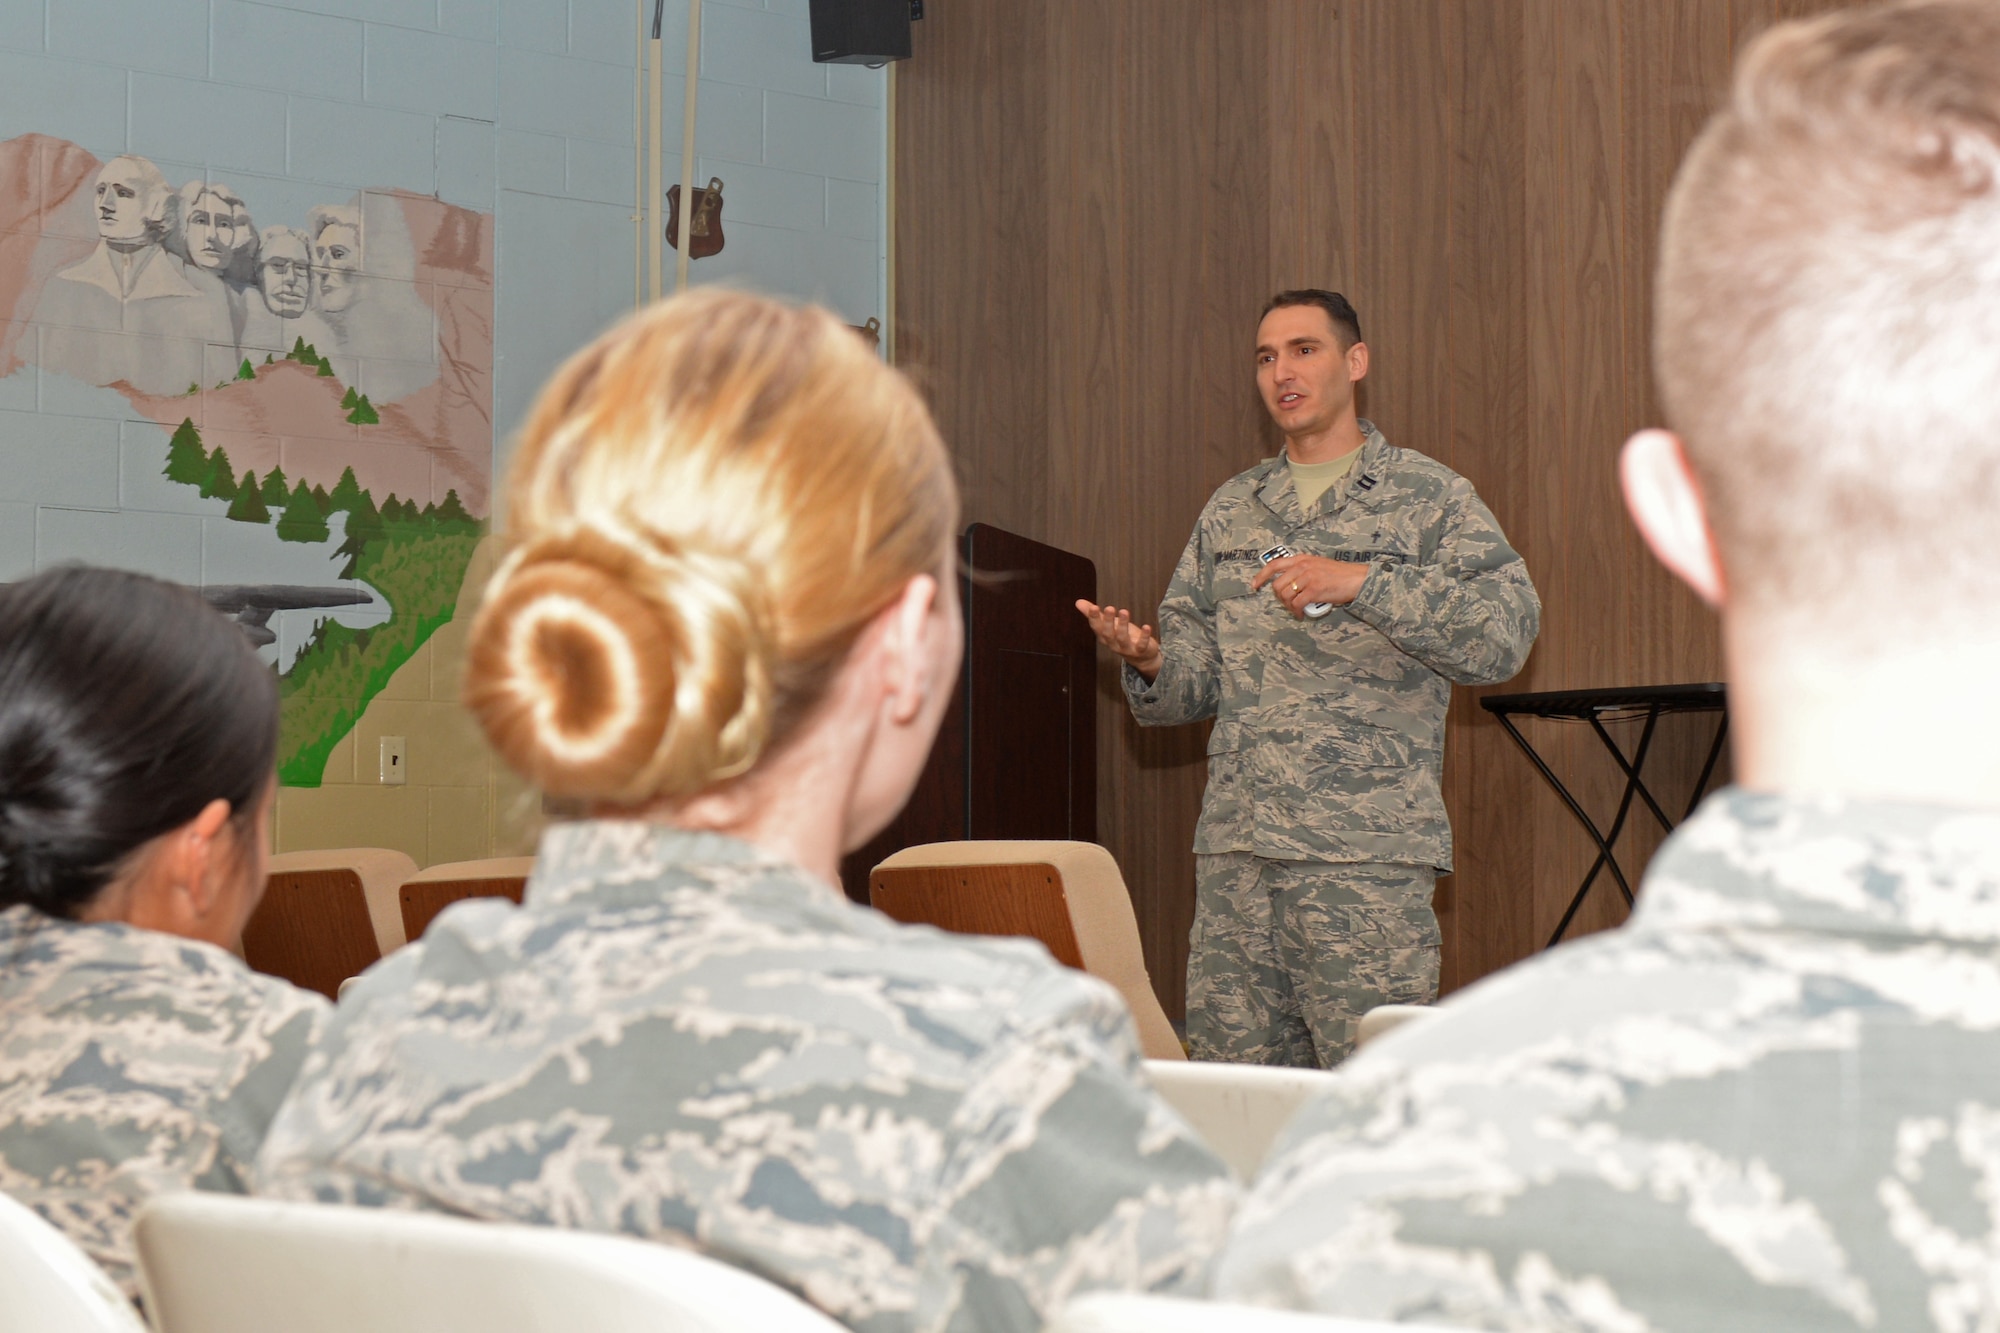 Capt. Raidel Leon-Martinez, a 28th Bomb Wing chaplain, talks to Airmen at the 28th Communications Squadron building about having boundaries and taking care of themselves at Ellsworth Air Force Base, S.D., May 9, 2018. The wing’s chapel team paired up with the mental health clinic to help Airmen express anything going on in their lives and to know the avenues they have access to. (U.S. Air Force photo by Airman 1st Class Nicolas Z. Erwin)